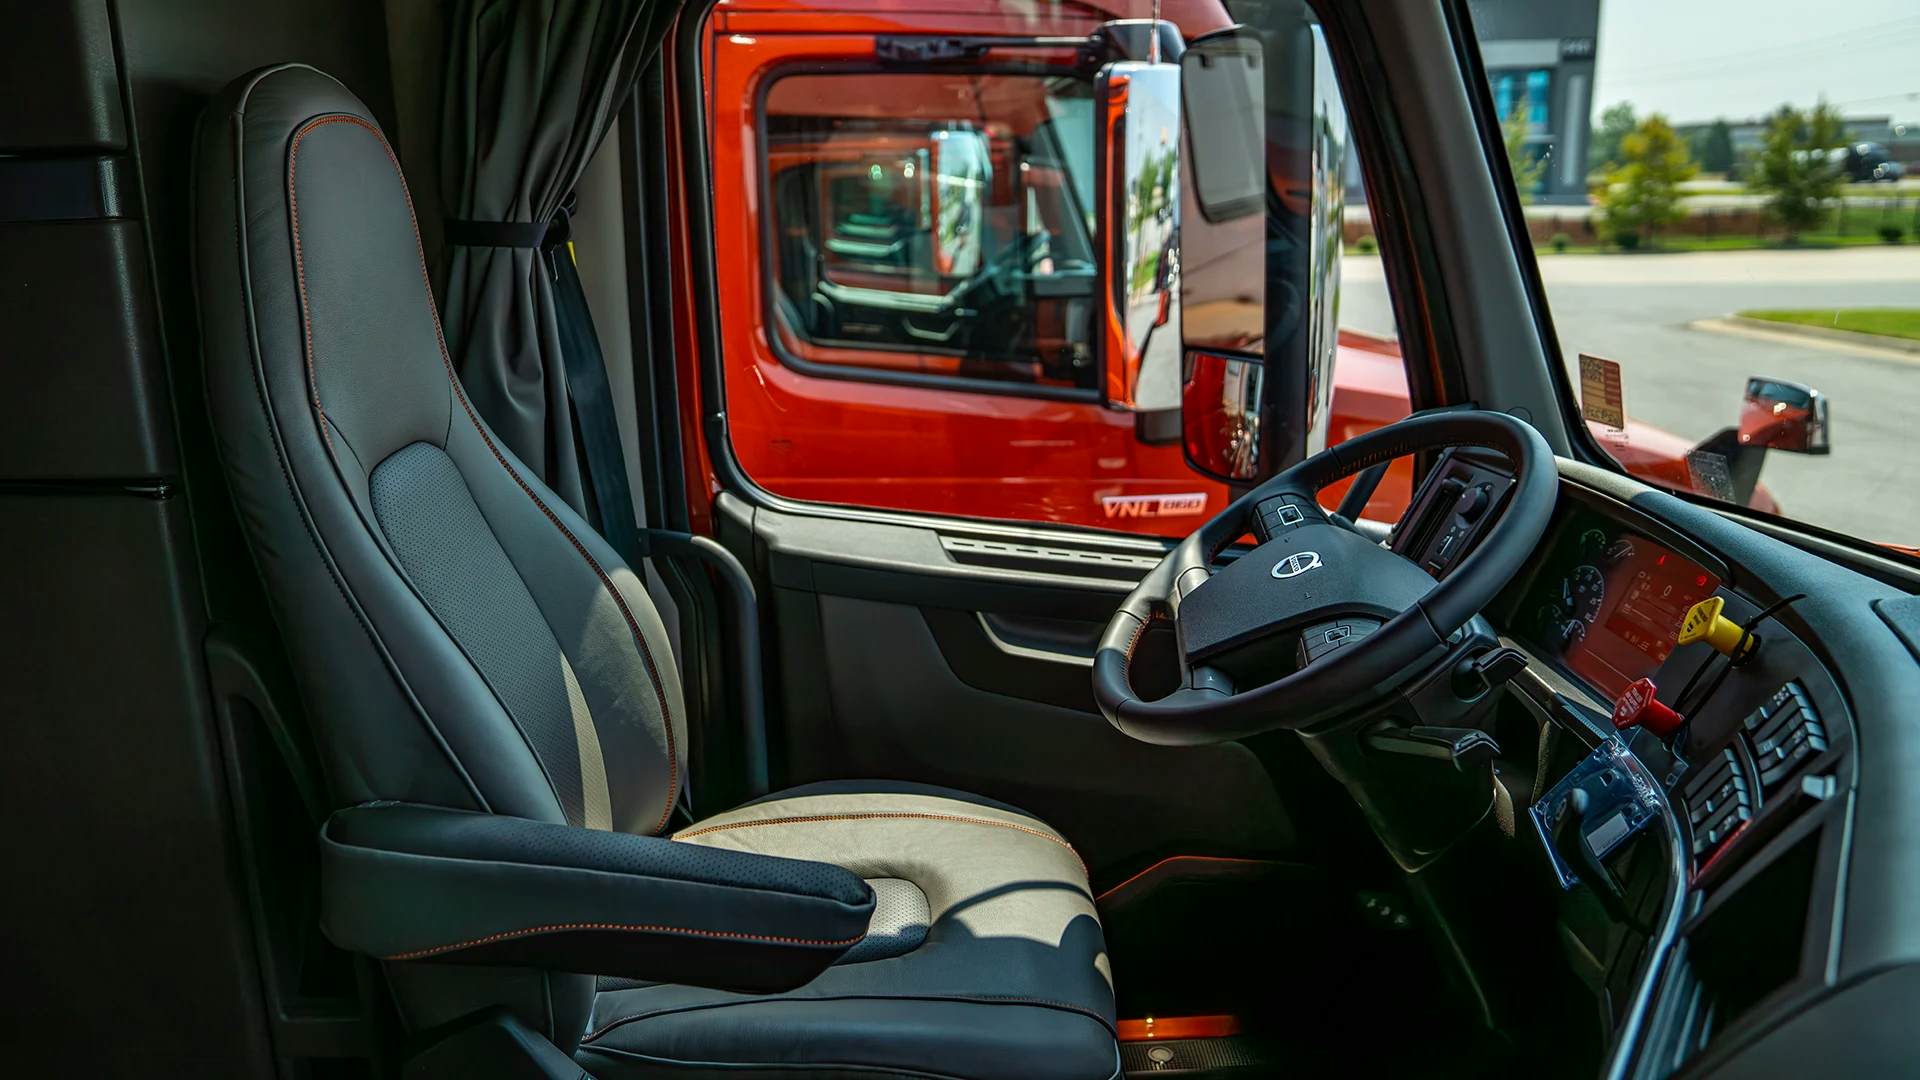 Interior of a modern and well-maintained semi-truck cabin, with a focus on the driver's seat, which has grey upholstery with orange stitching. The dashboard, featuring red-illuminated gauges and the Volvo logo on the steering wheel, is visible, indicating the vehicle's brand.